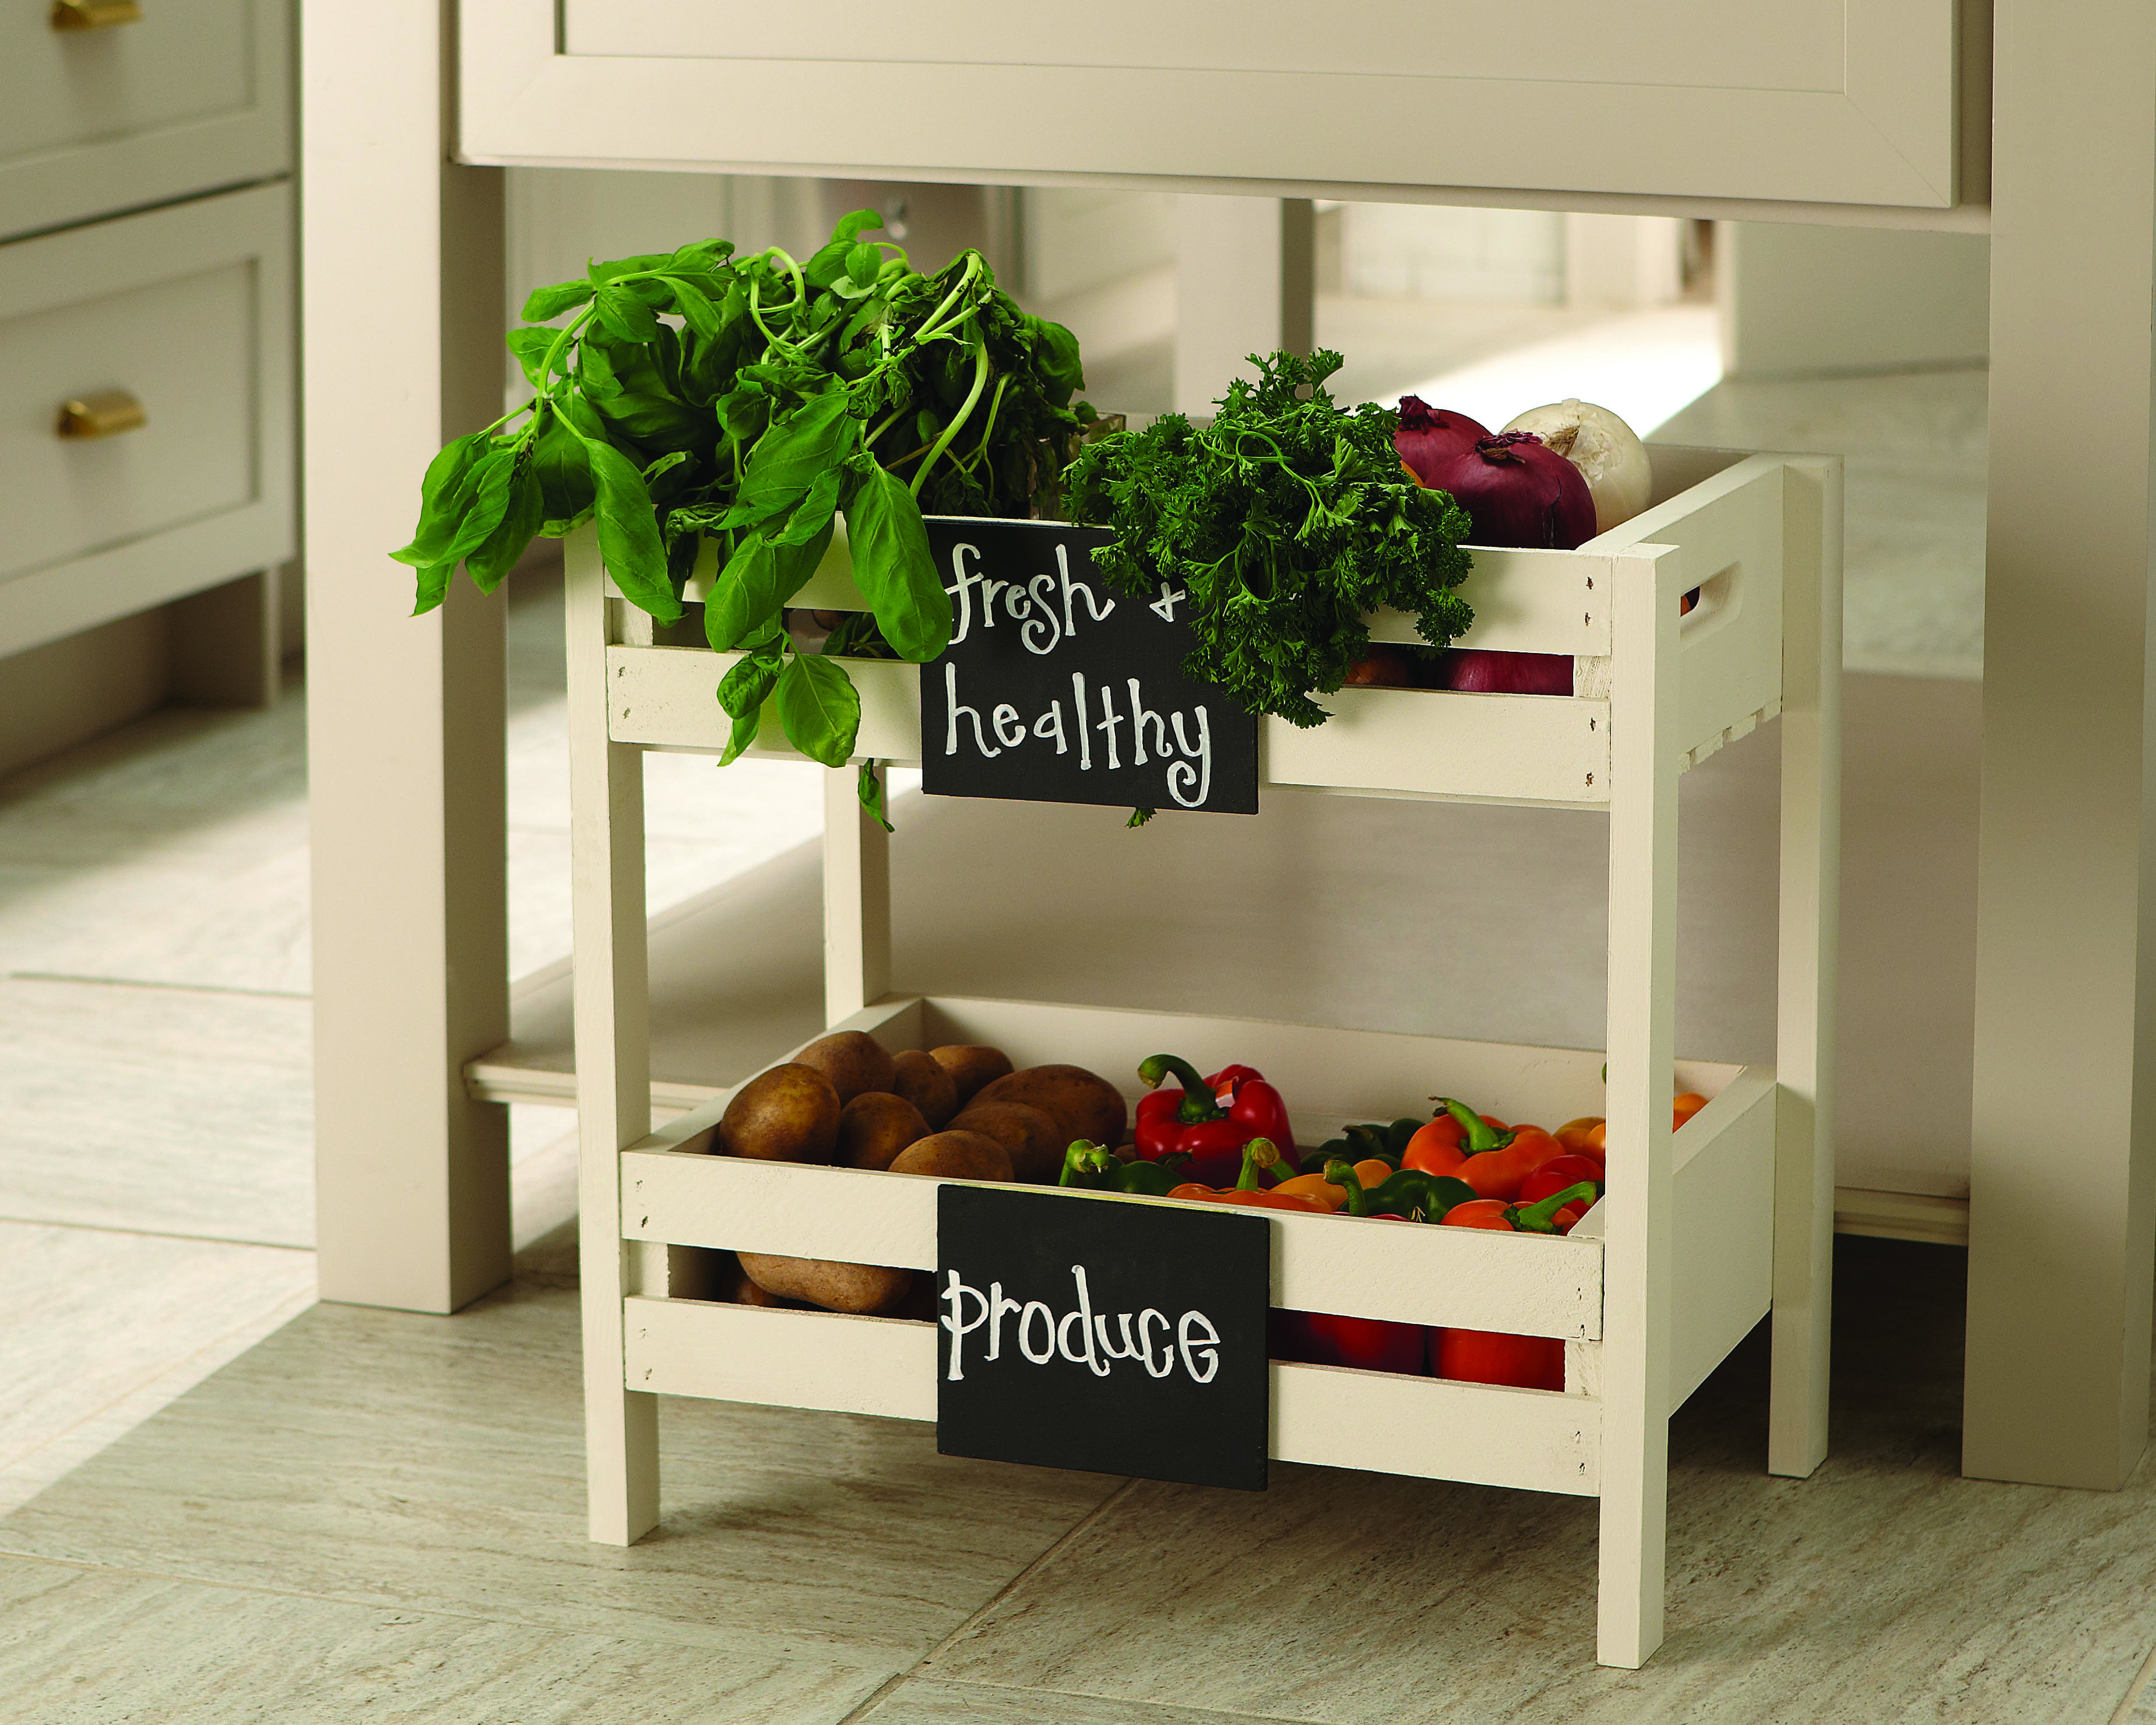 DIY vegetable stand with fresh produce